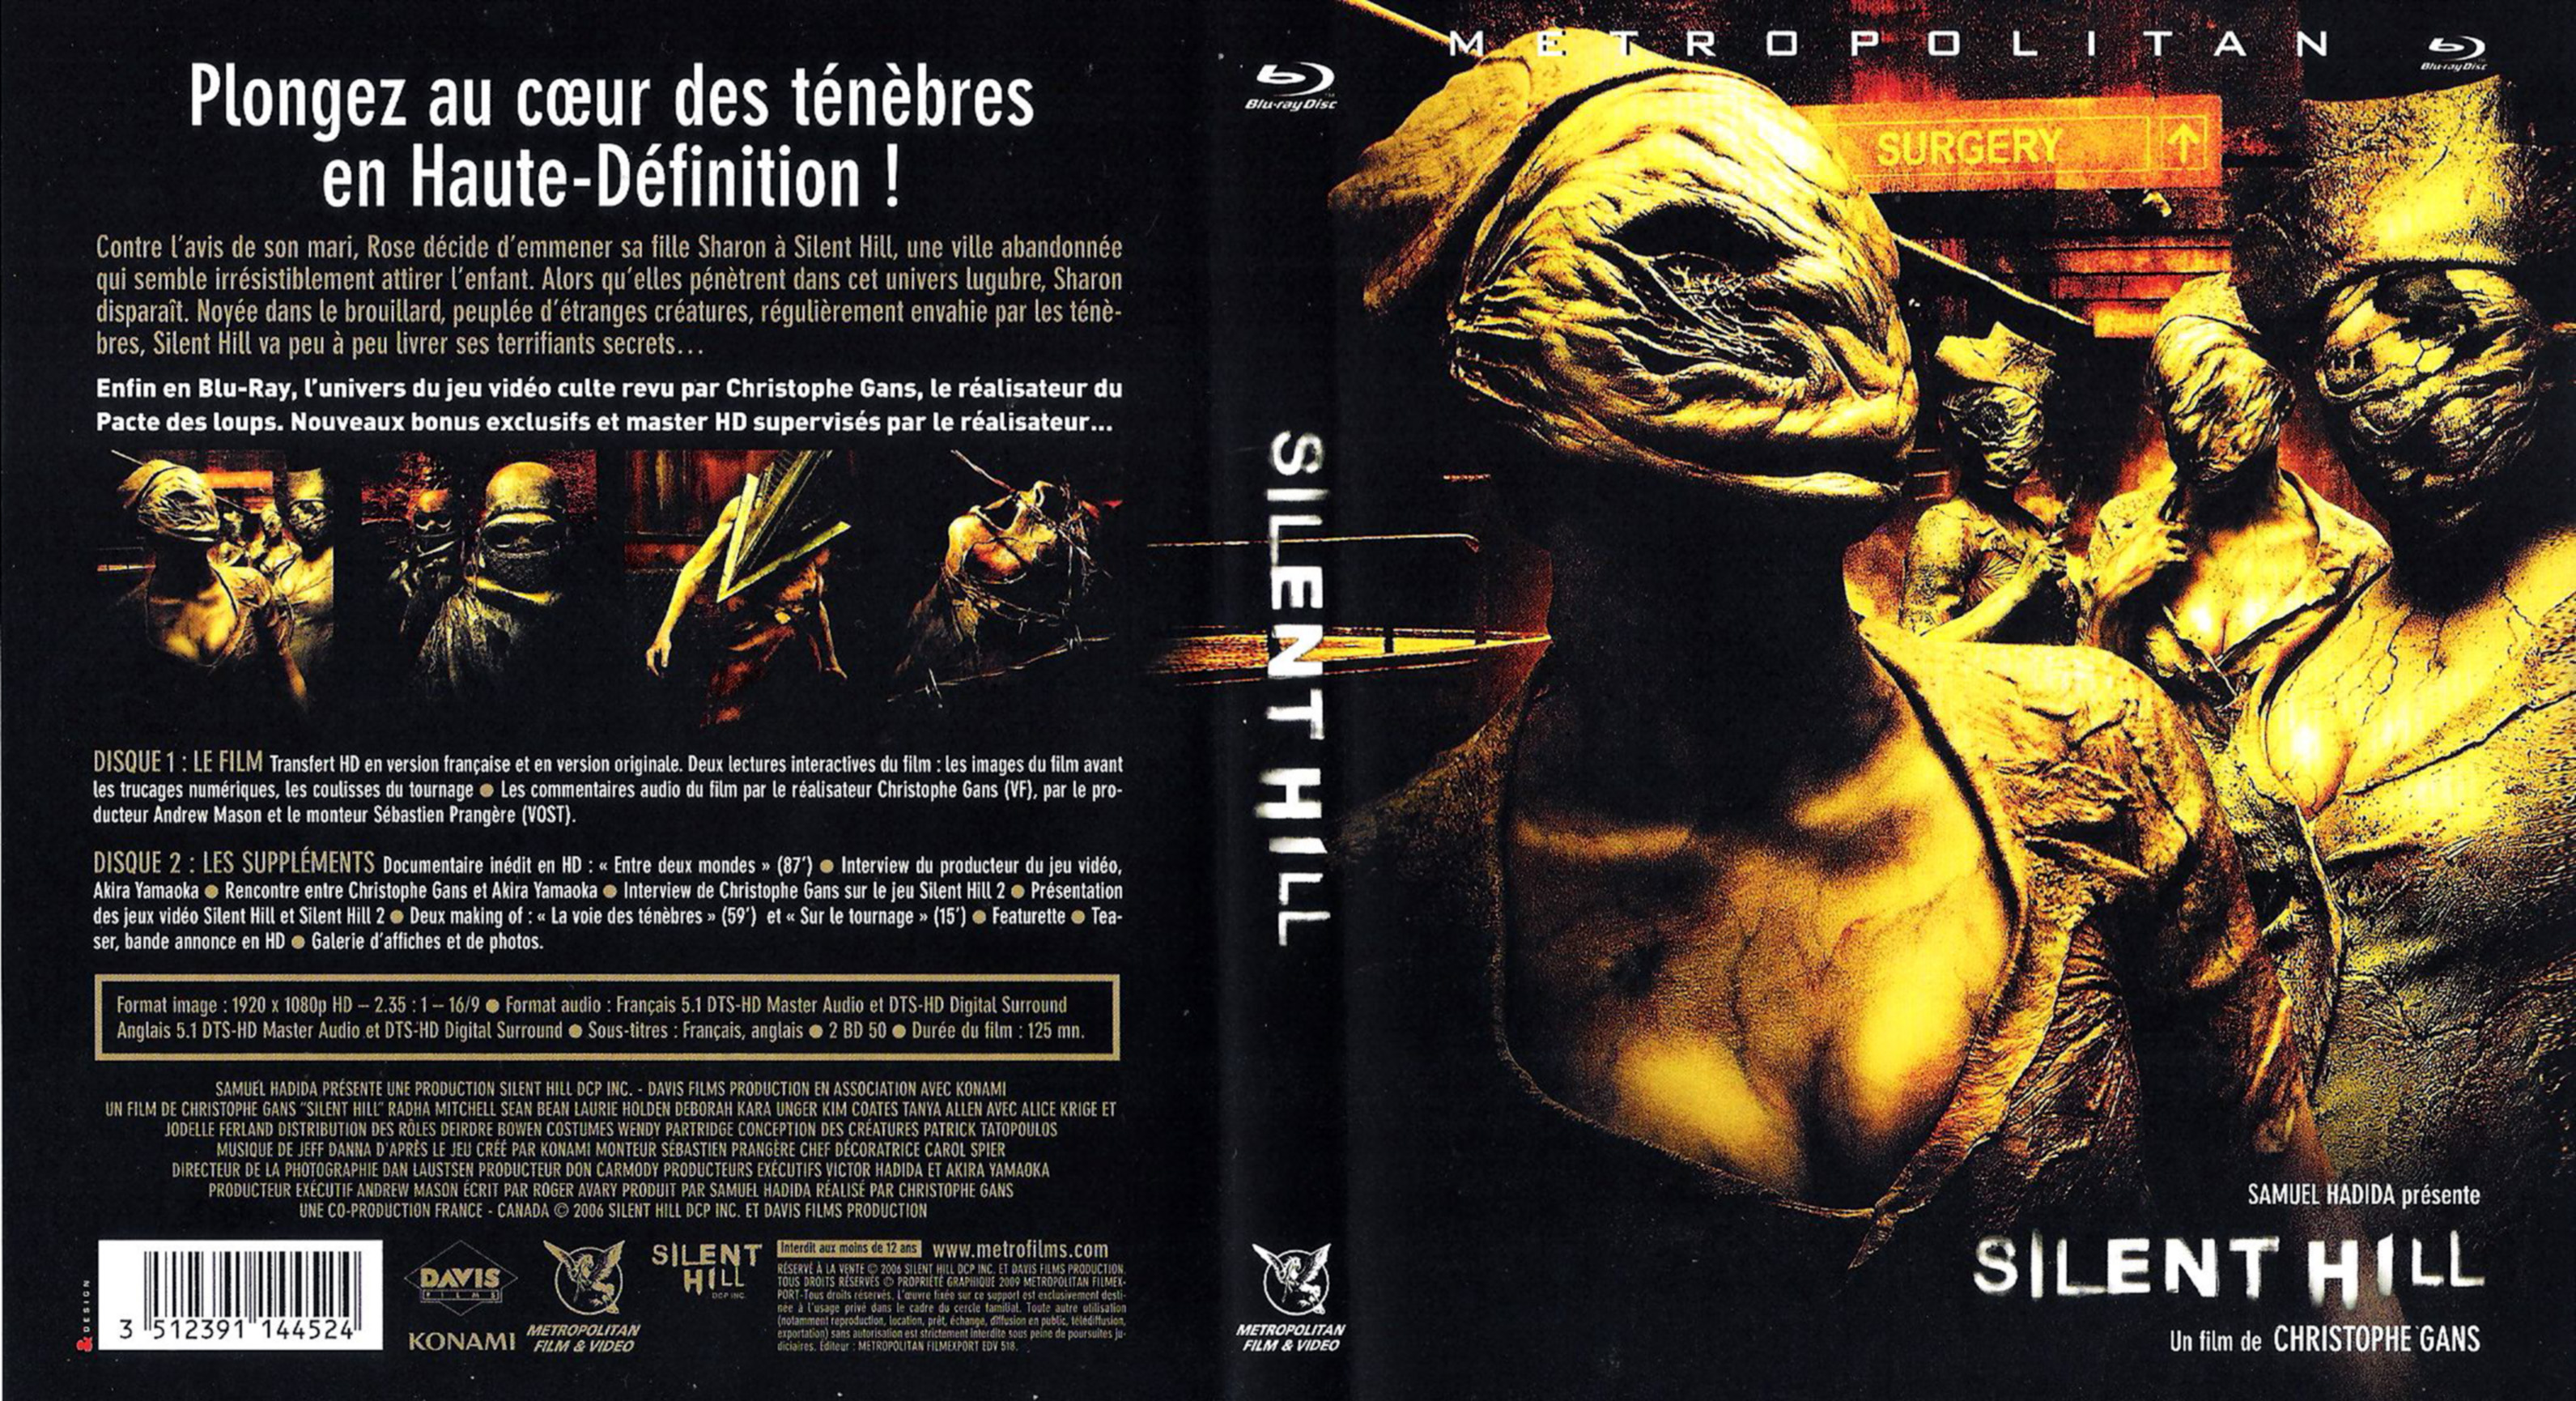 Jaquette DVD Silent Hill (BLU-RAY) v4